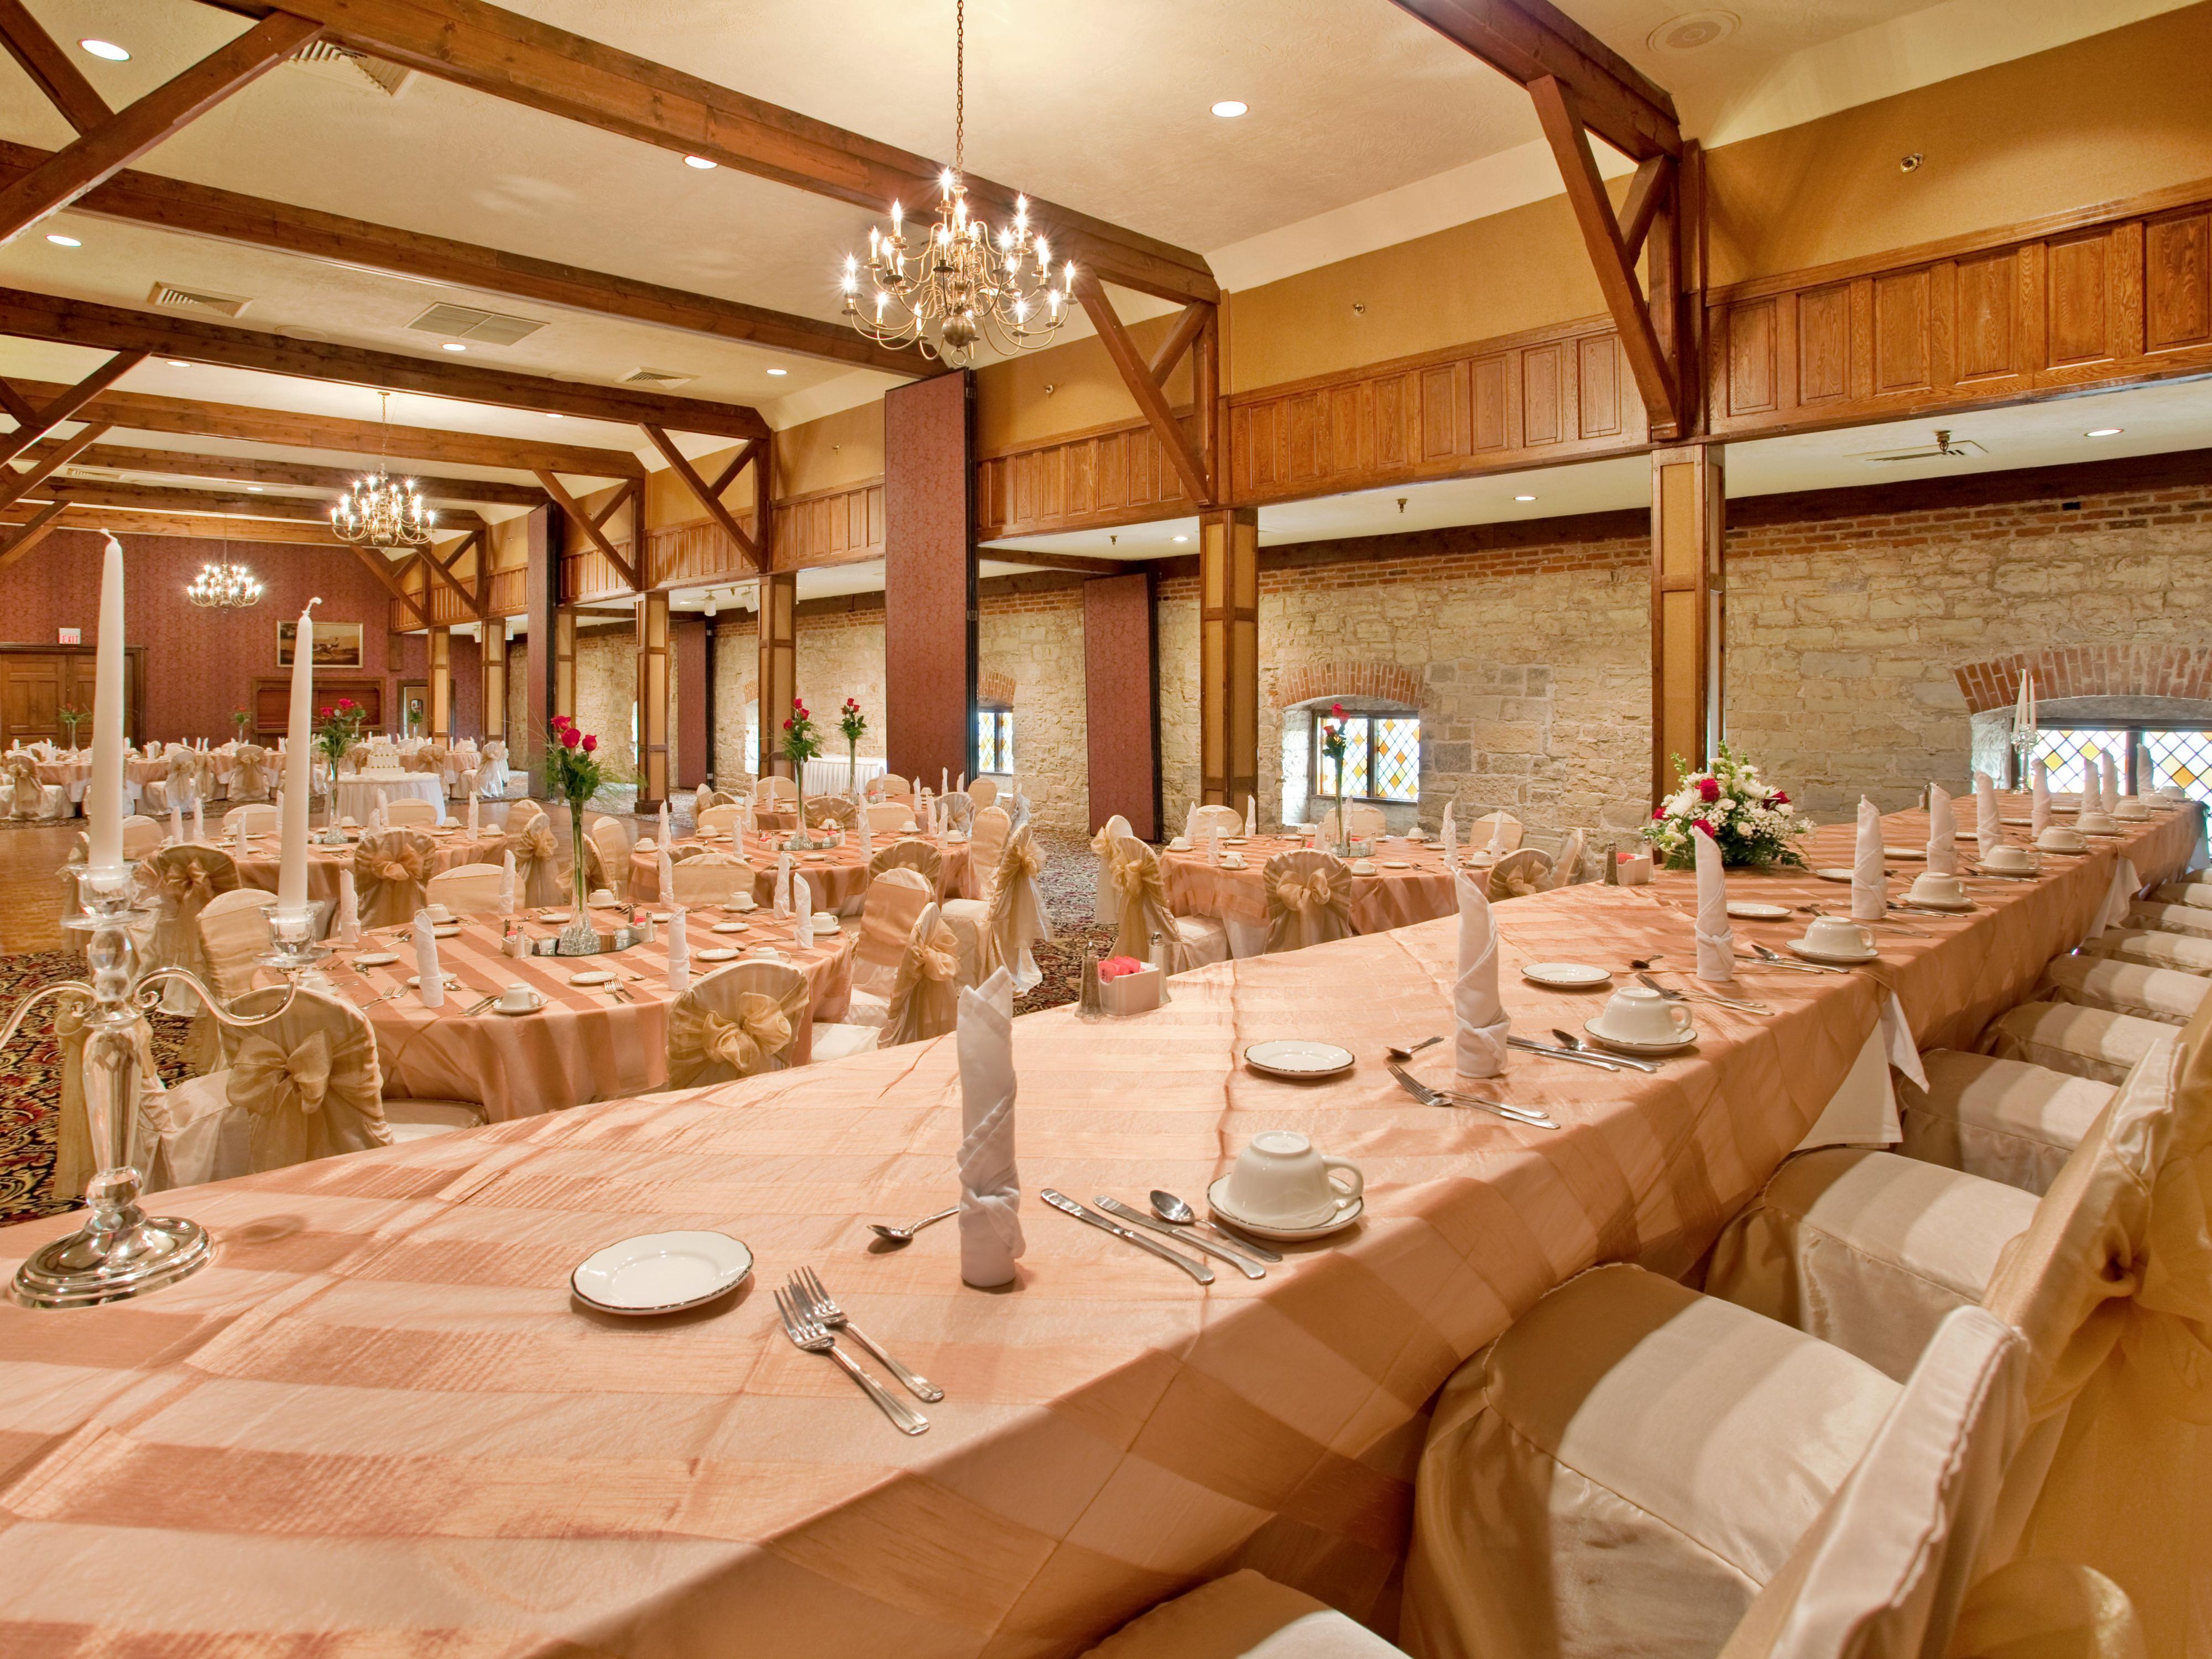 Your wedding is a start to your new life together. Because you want perfection, you've come to the Holiday Inn. Our venue is built in a 200 year old barn, the ballroom has original stonewall structure. Our professional staff is here to ensure that everything is exactly as you envision. Truly a one stop shop.  Call Adrienne 636-938-3315 x7756.